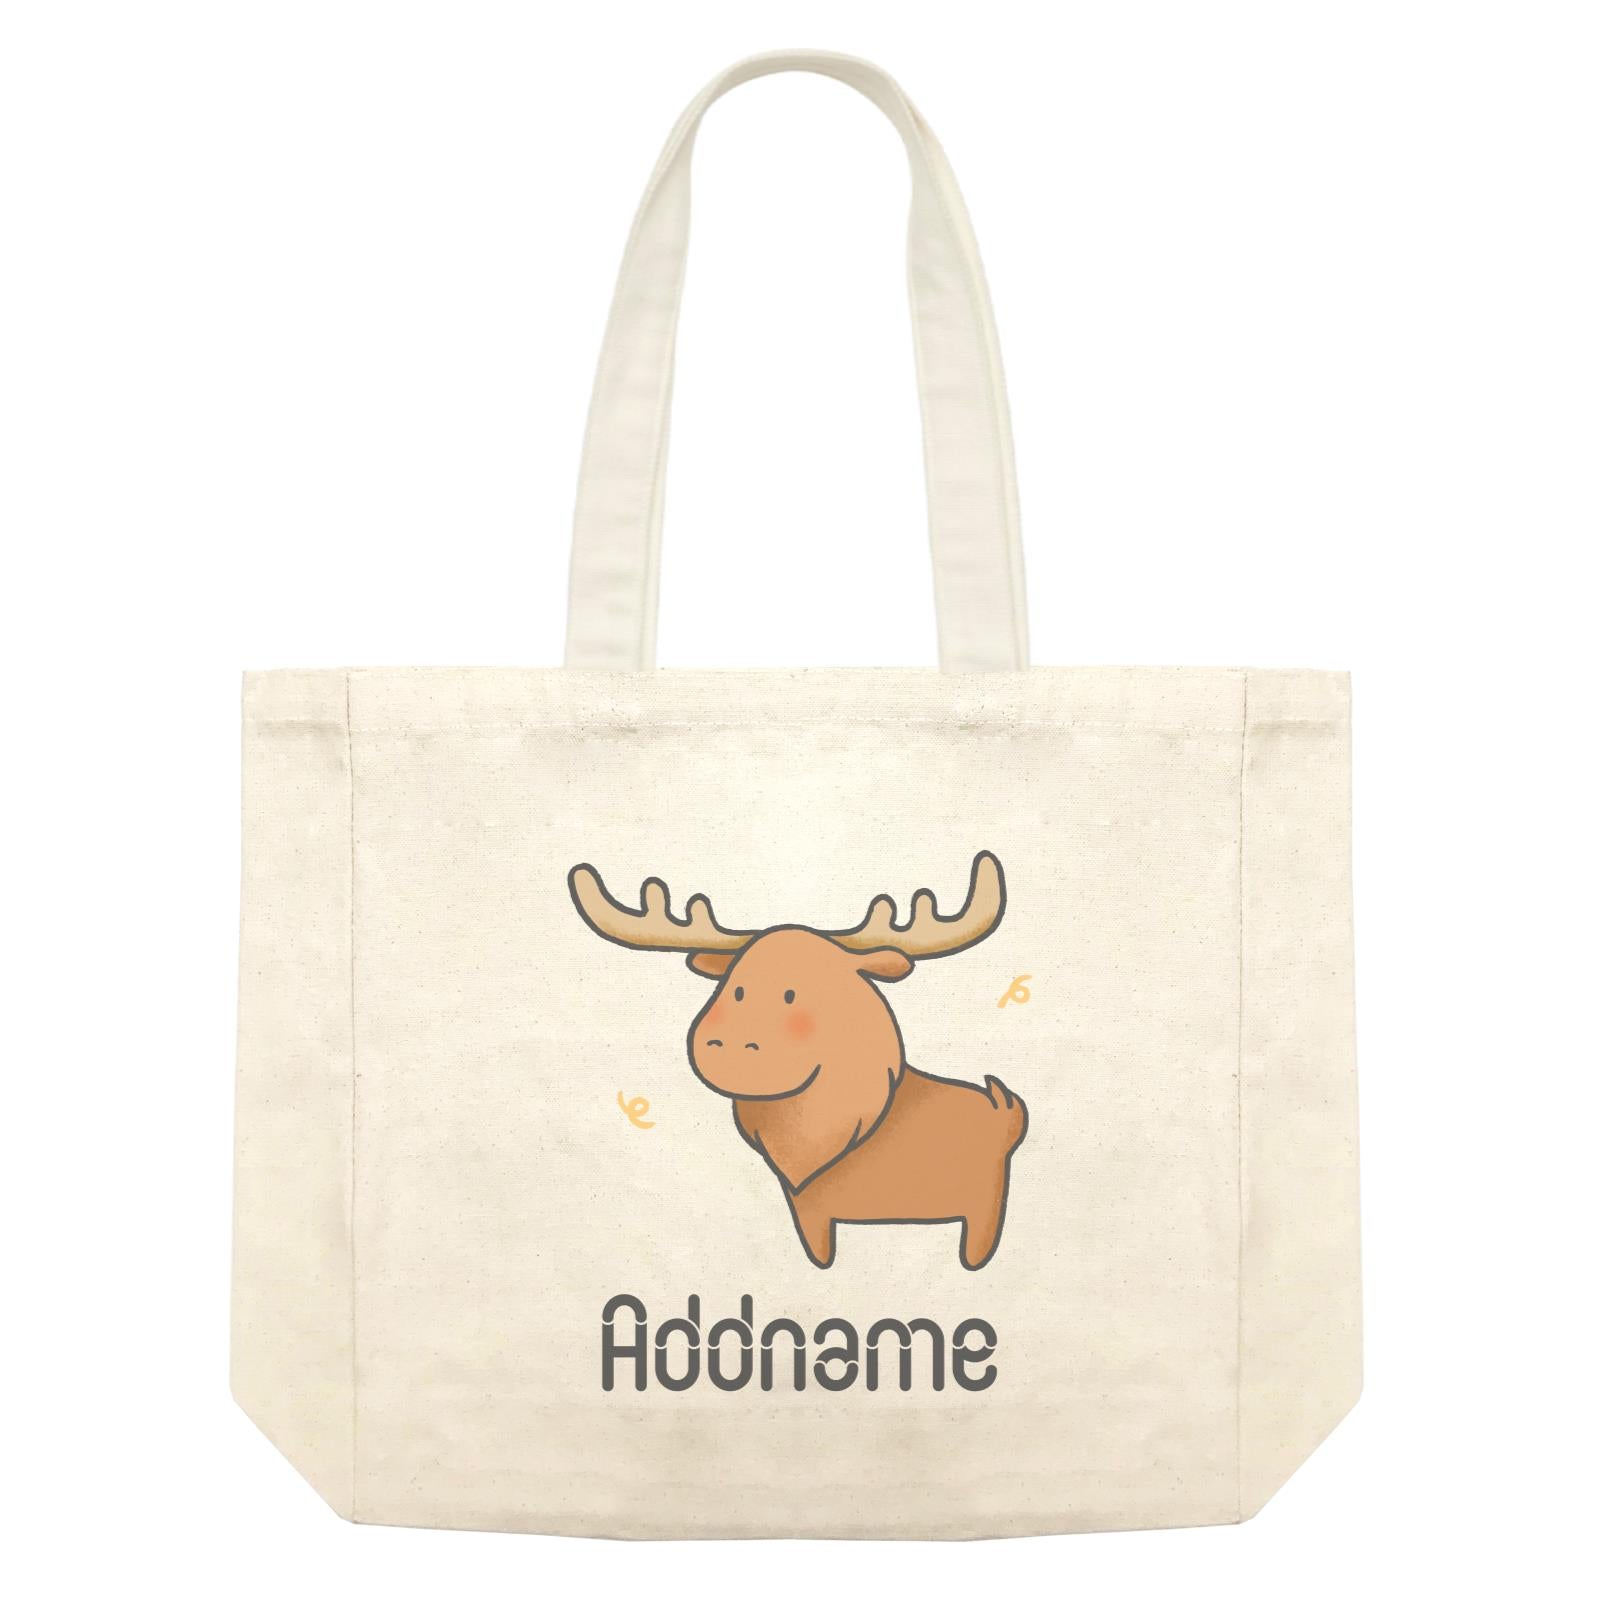 Cute Hand Drawn Style Moose Addname Shopping Bag